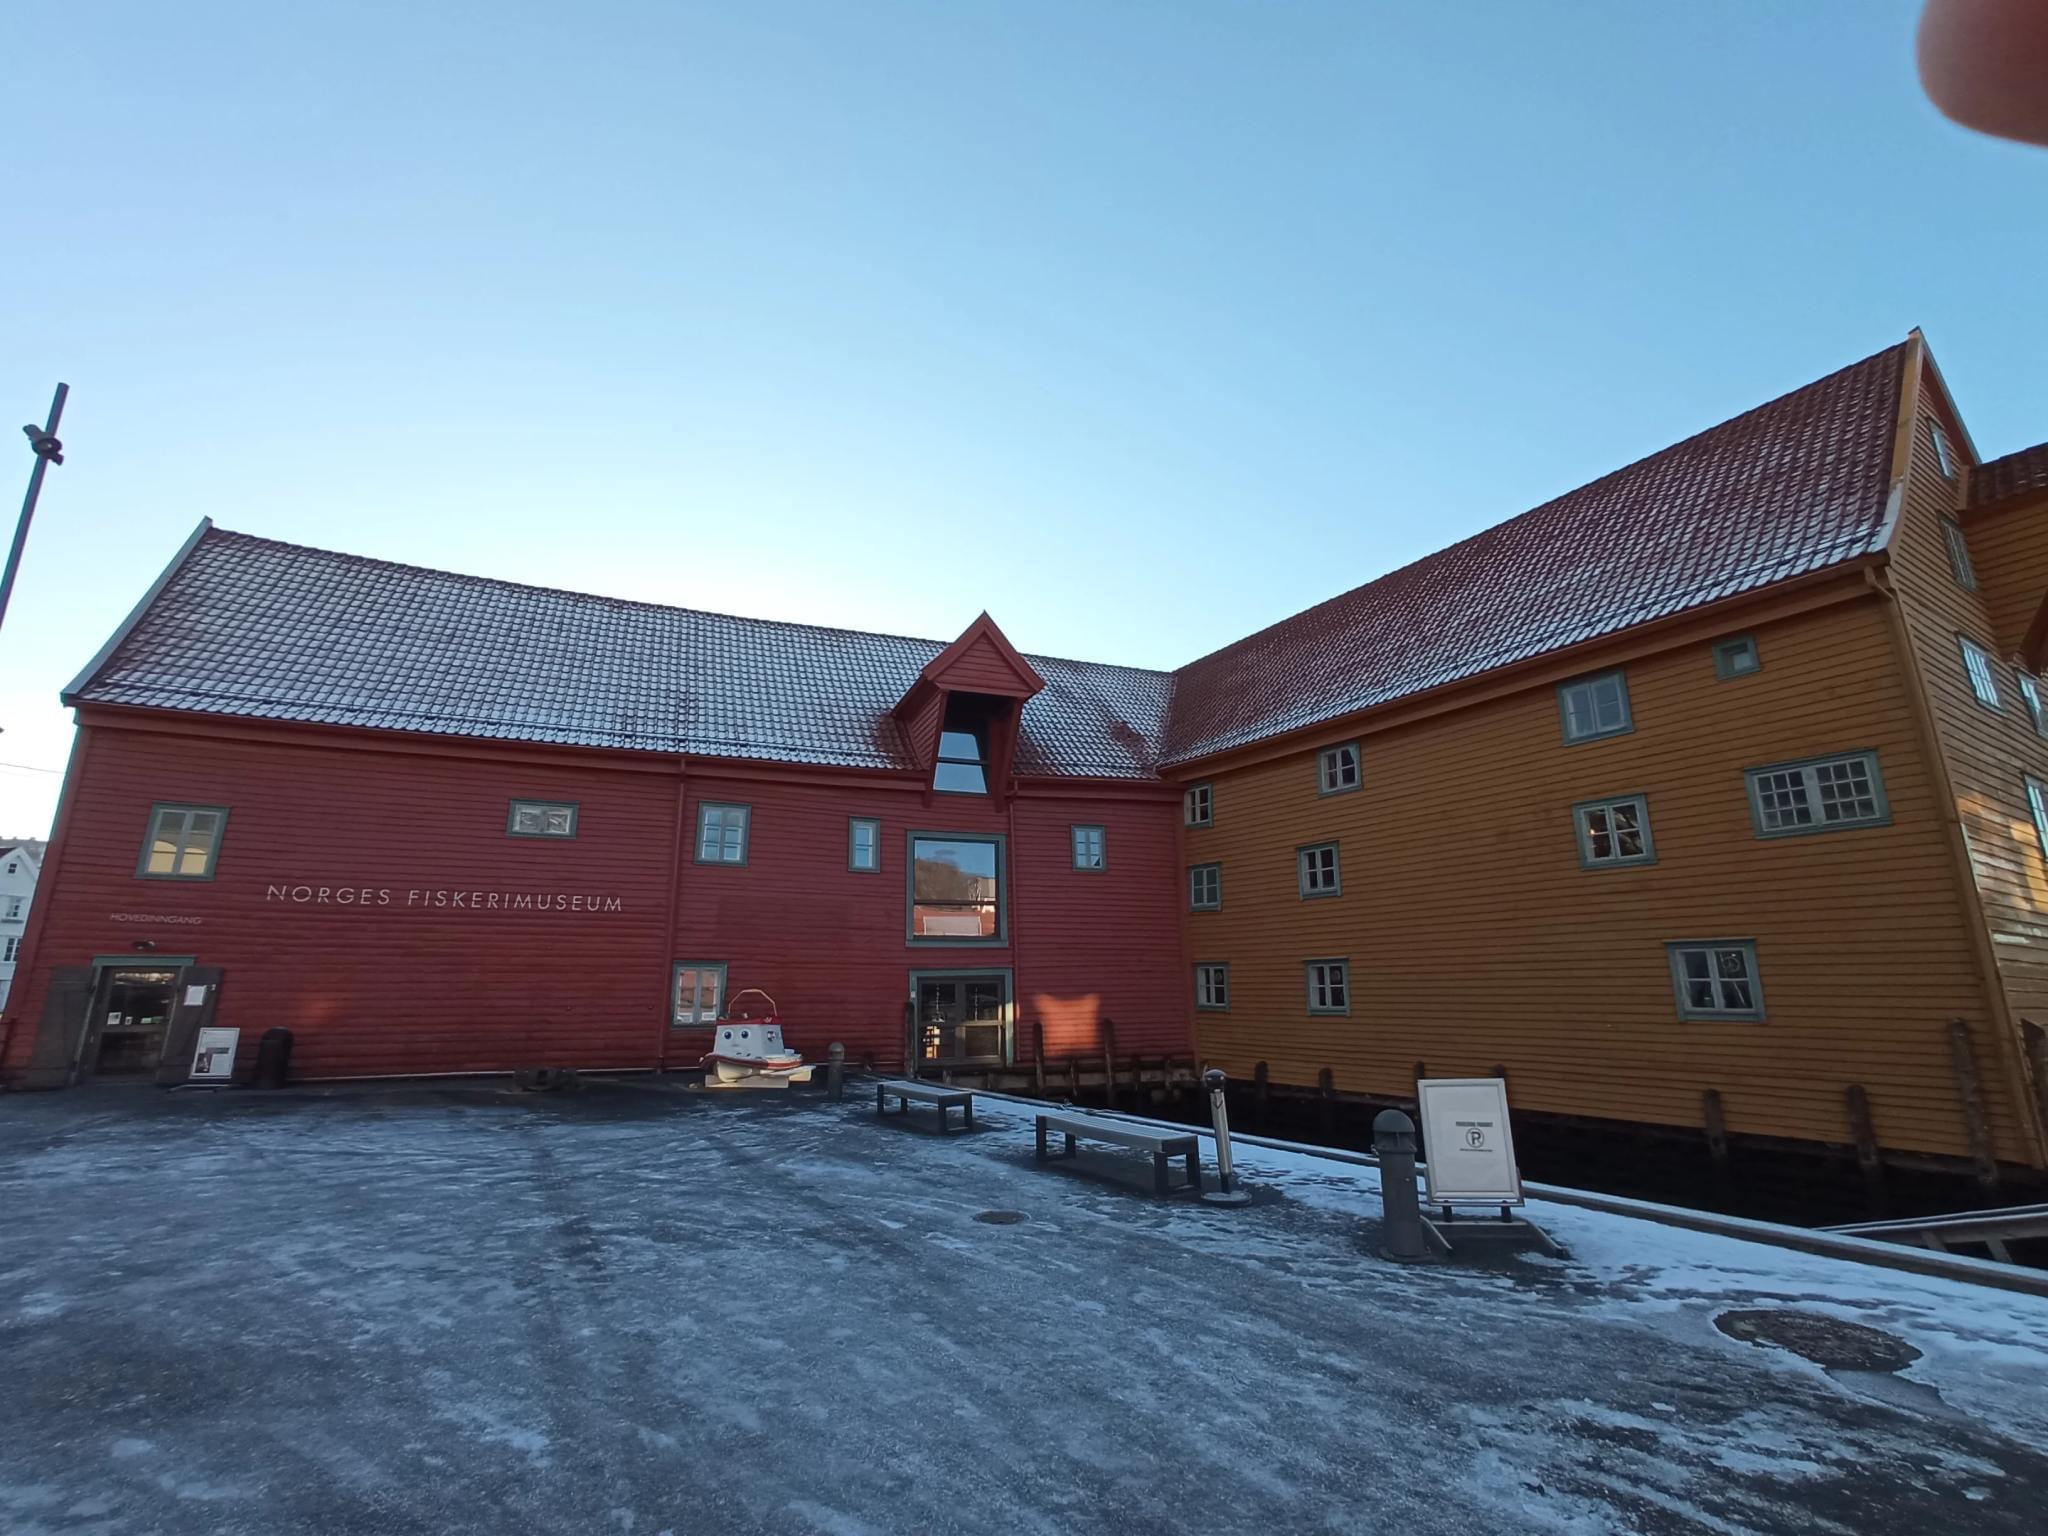 Norway Fisheries Museum Overview